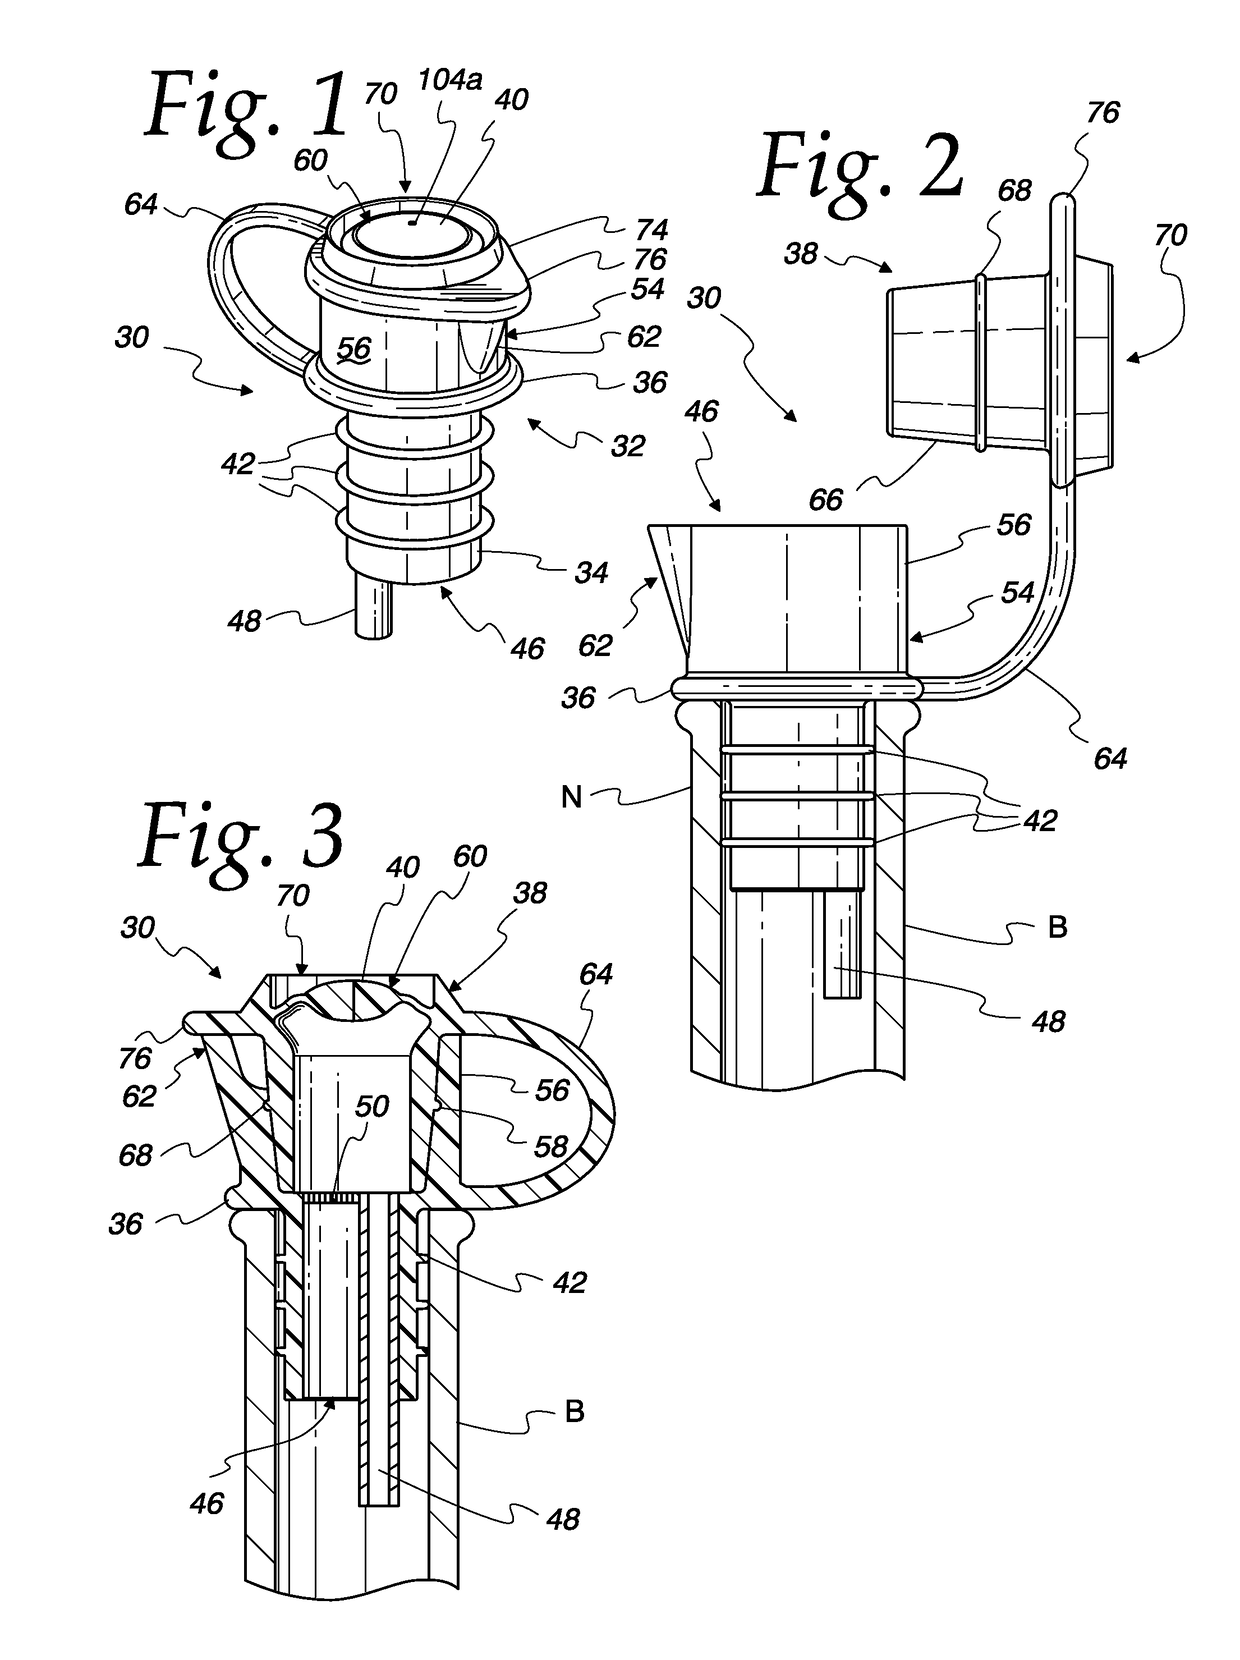 Vacuum bottle stopper for introducing inert gas into a wine container